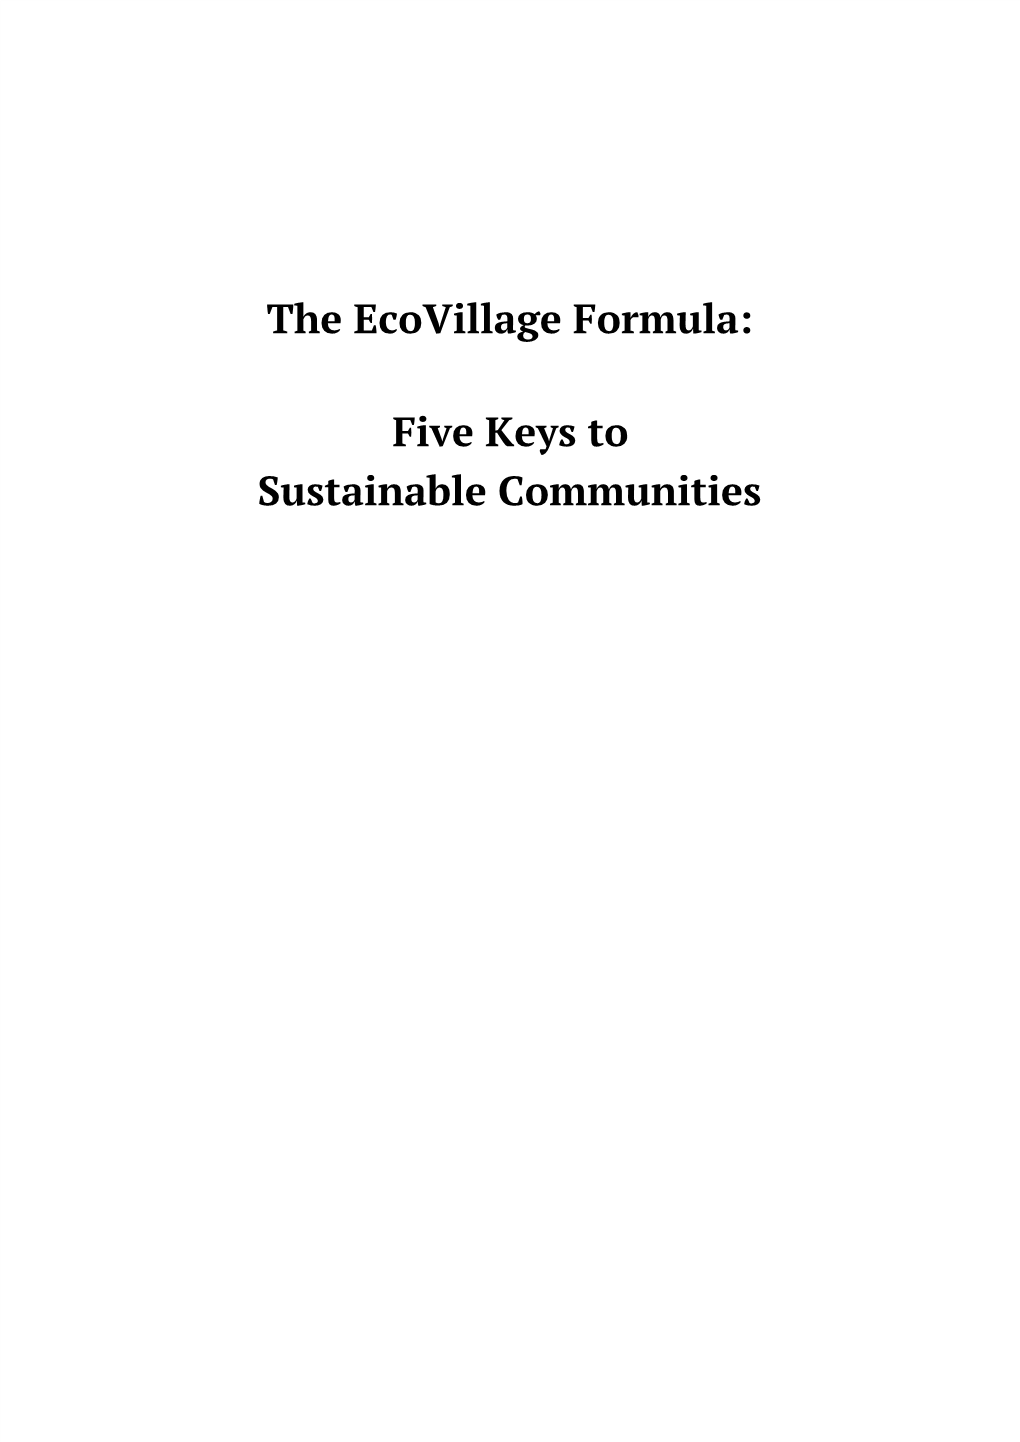 The Ecovillage Formula: Five Keys to Sustainable Communities